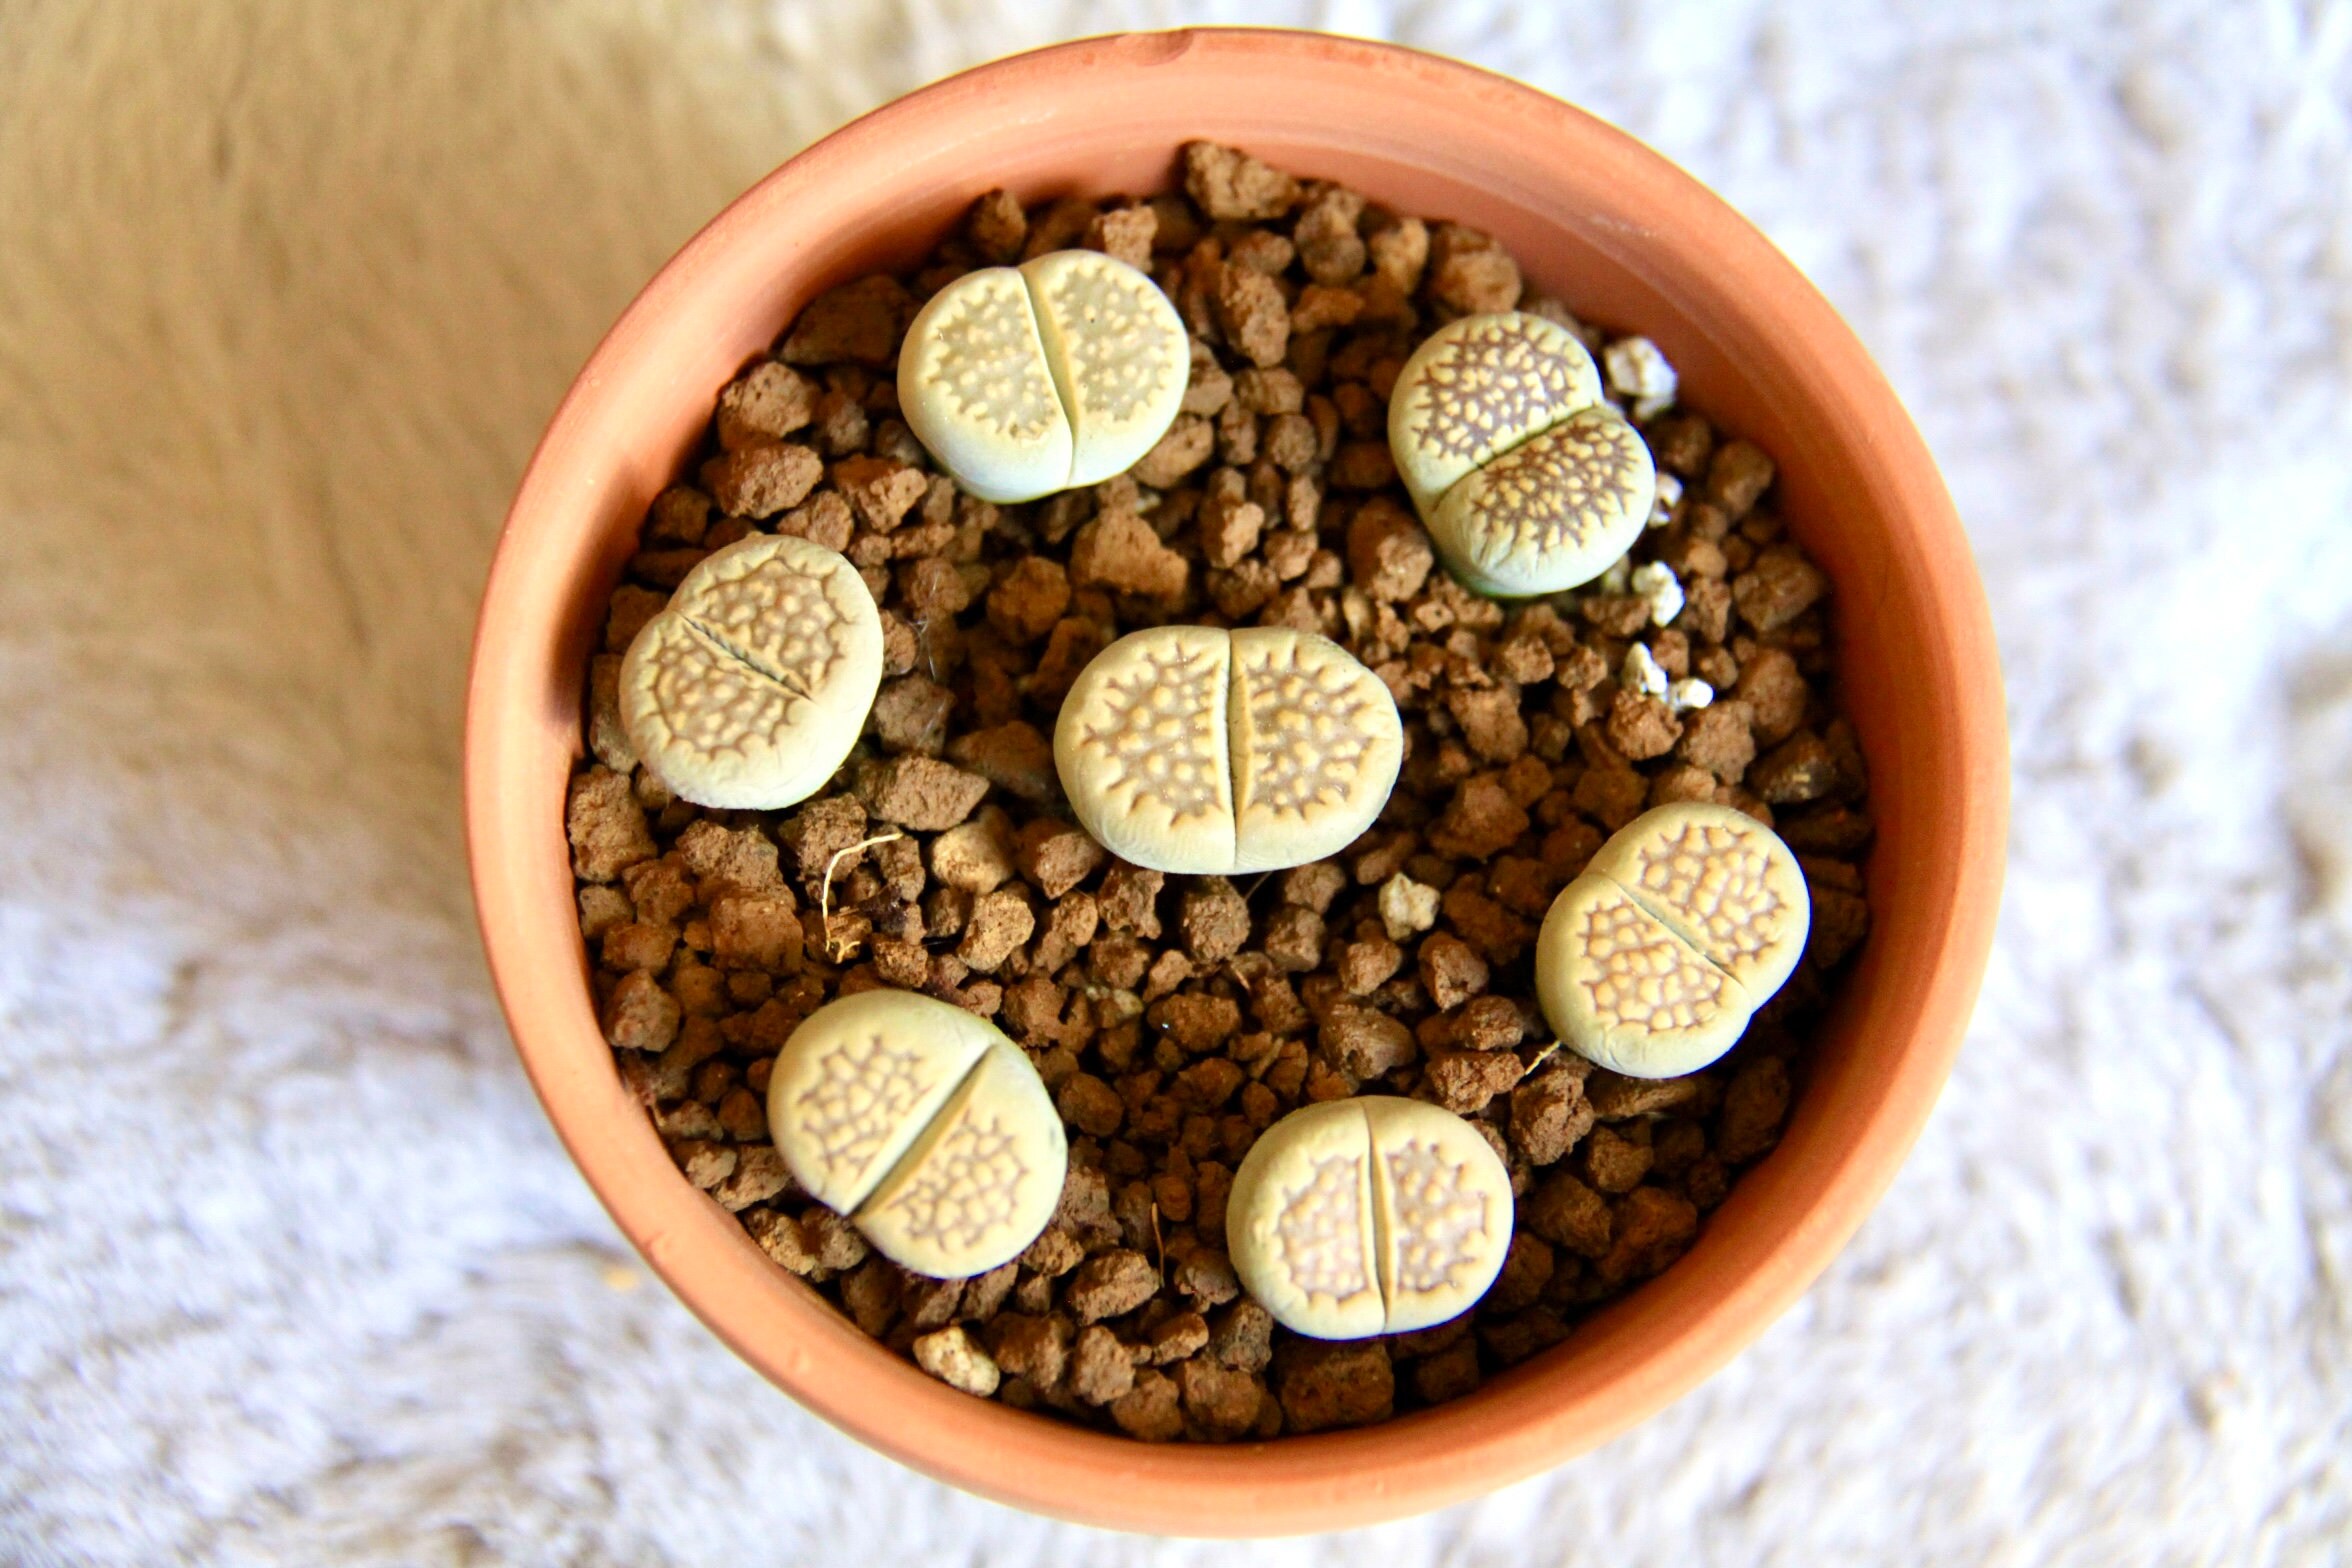 LIVE PLANT1 two-year-old Lithops HalliiExotic succulentrare succulent